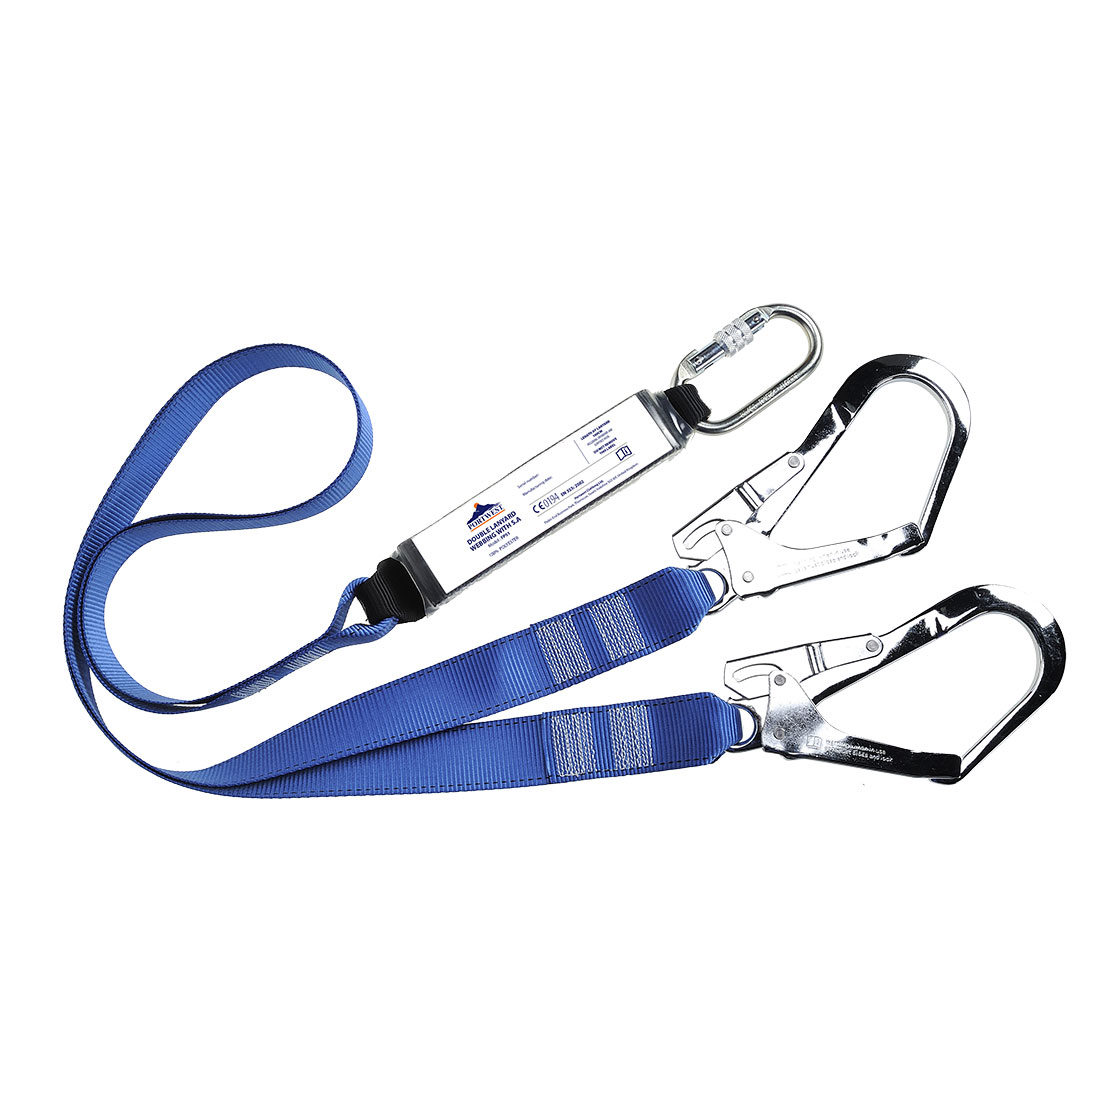 Double Webbing 1.8m Lanyard With Shock Absorber - Royal Blue